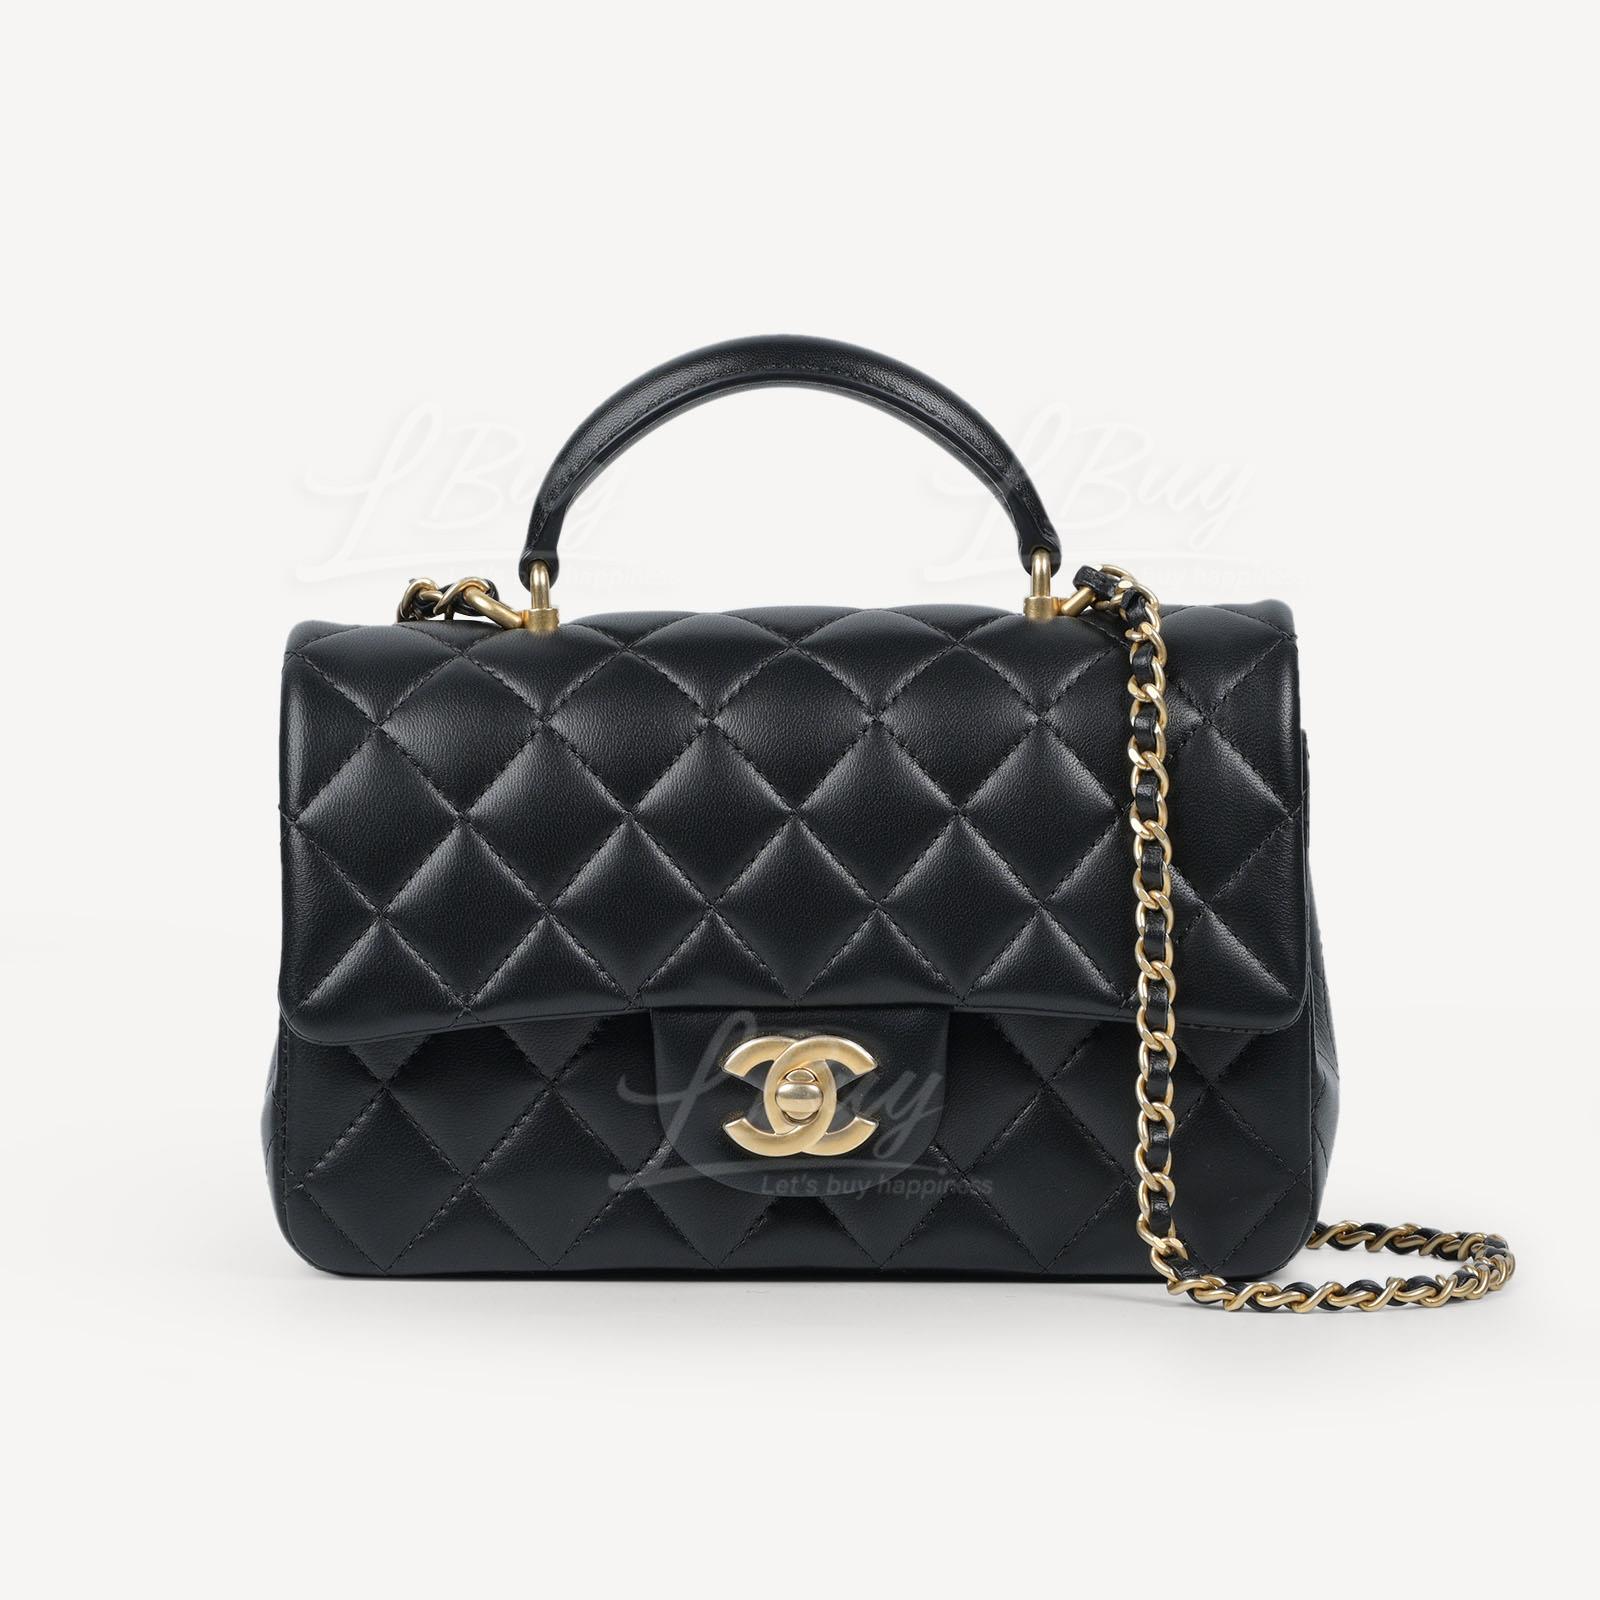 Chanel Black Flap Bag with Top Handle AS2431